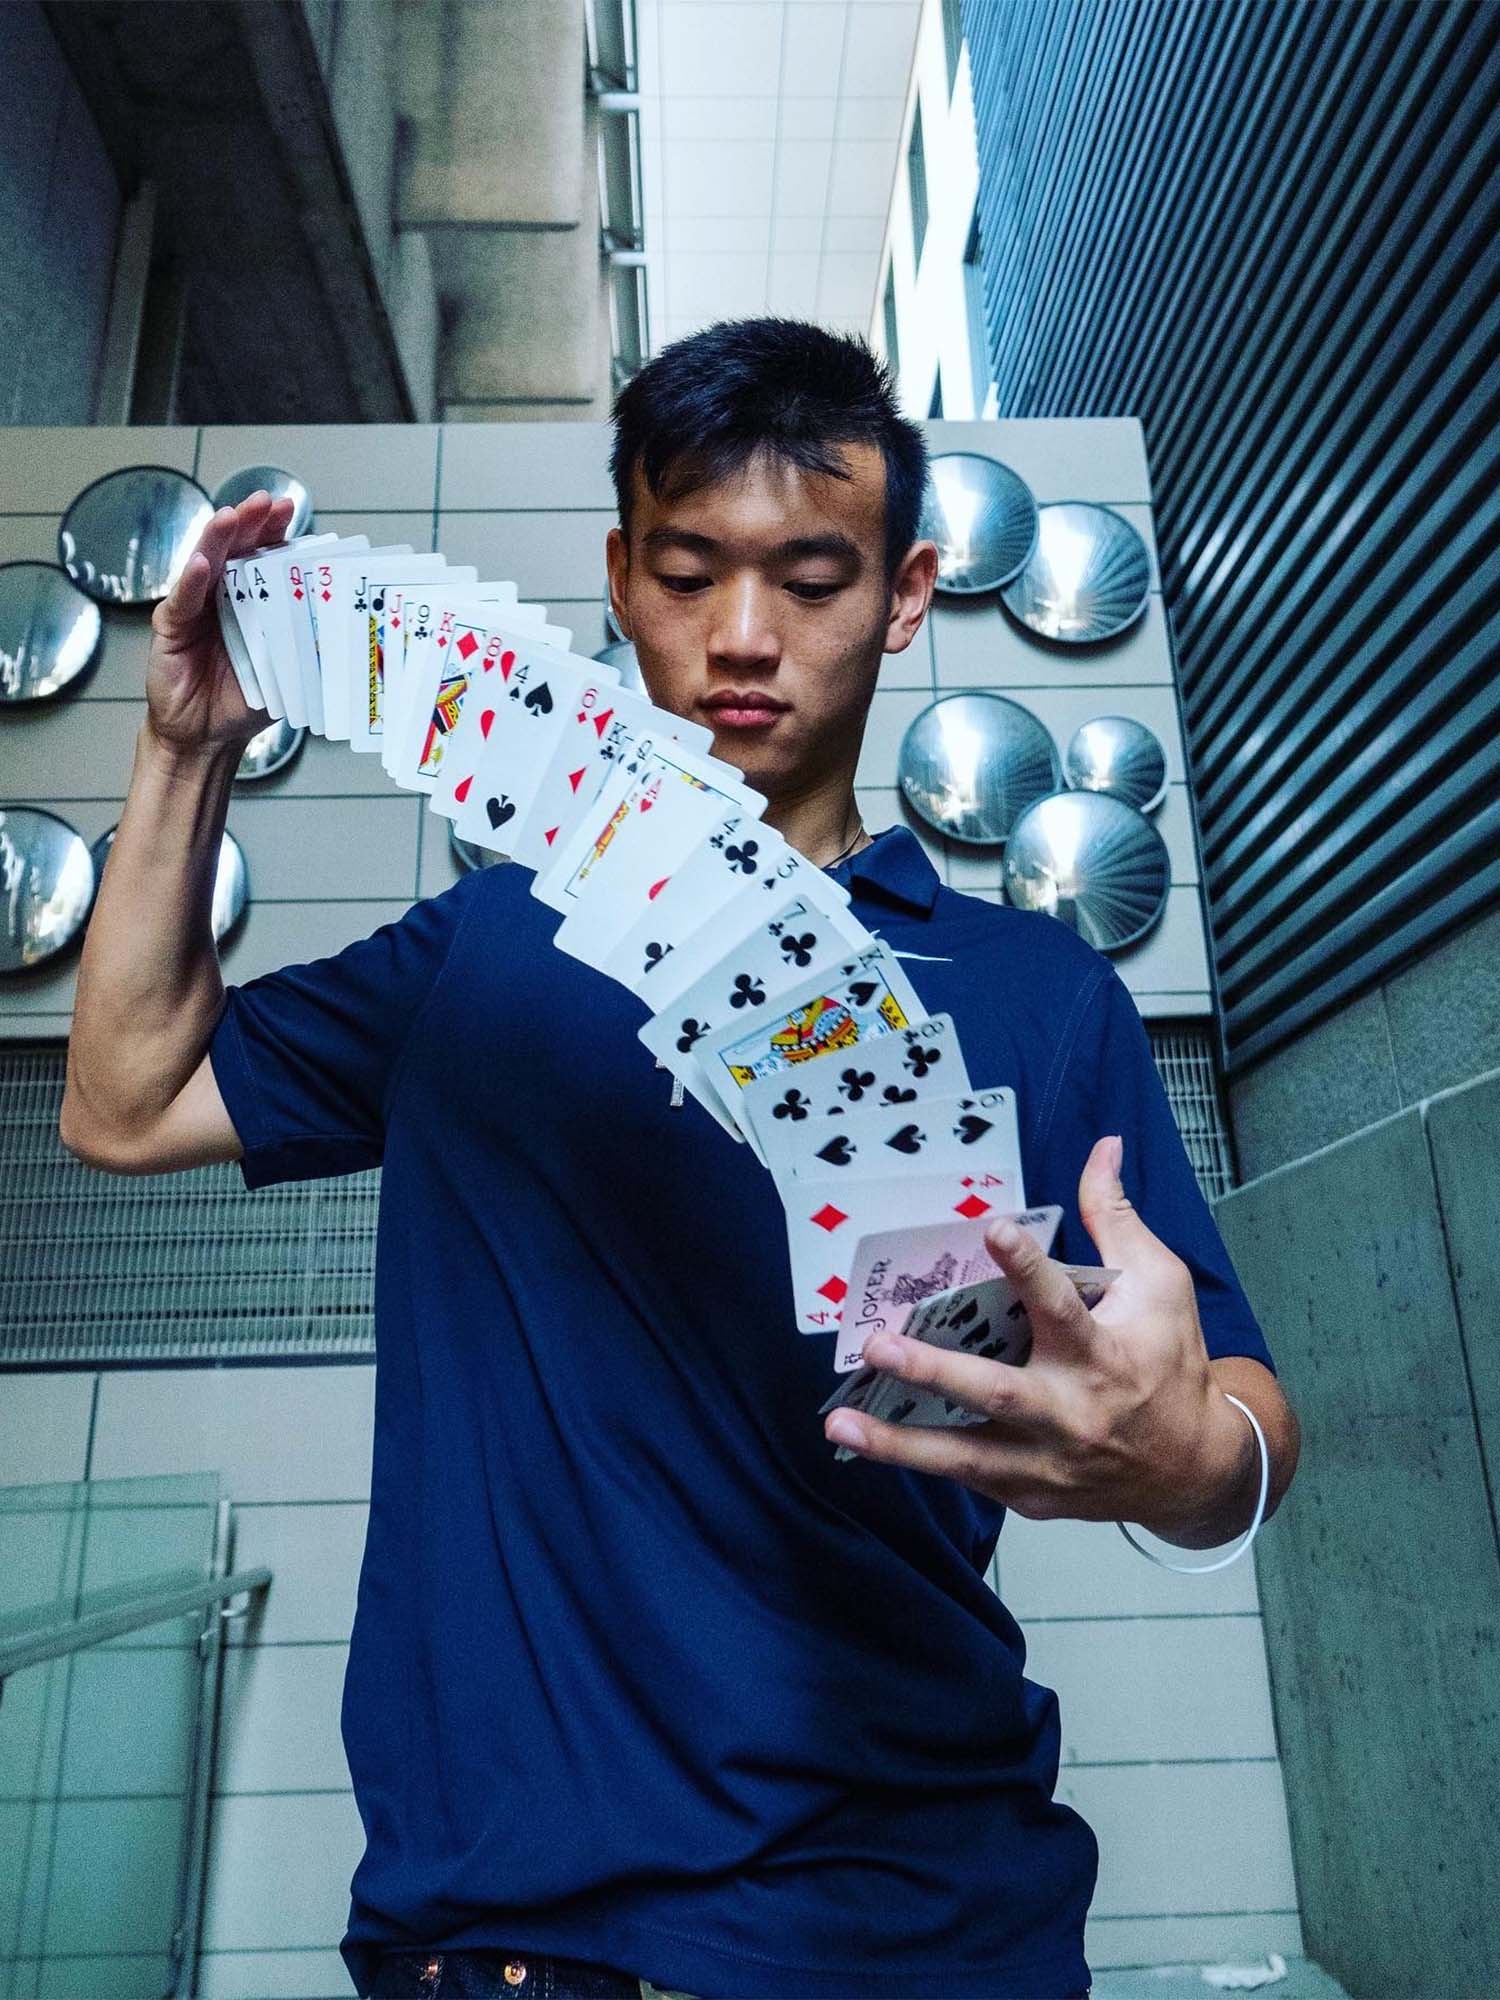 BU student Henry Di—who goes by the stage name Enrique the Magician—performs magic tricks on TikTok. Here he performs a card trick for the camera